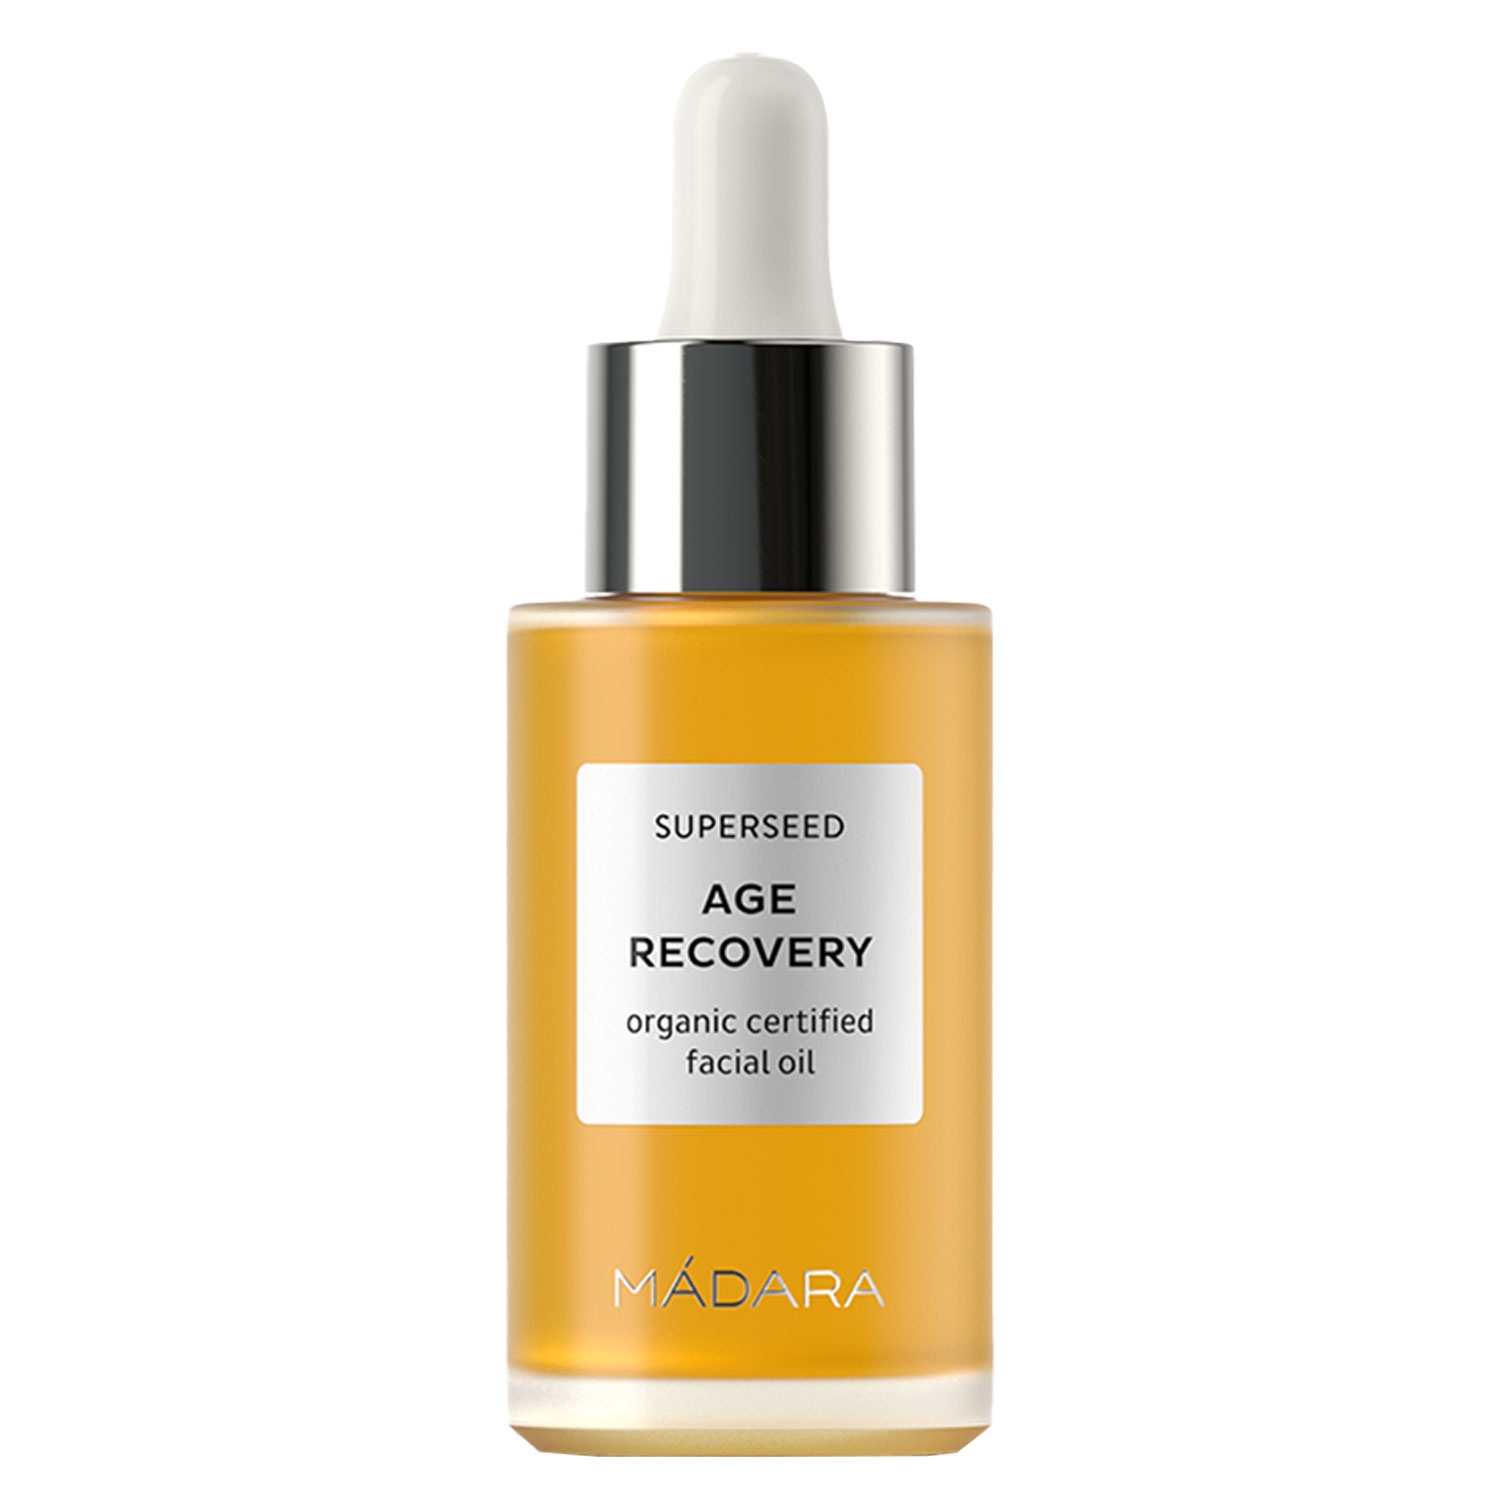 Product image from MÁDARA Care - Superseed Age Recovery Facial Oil